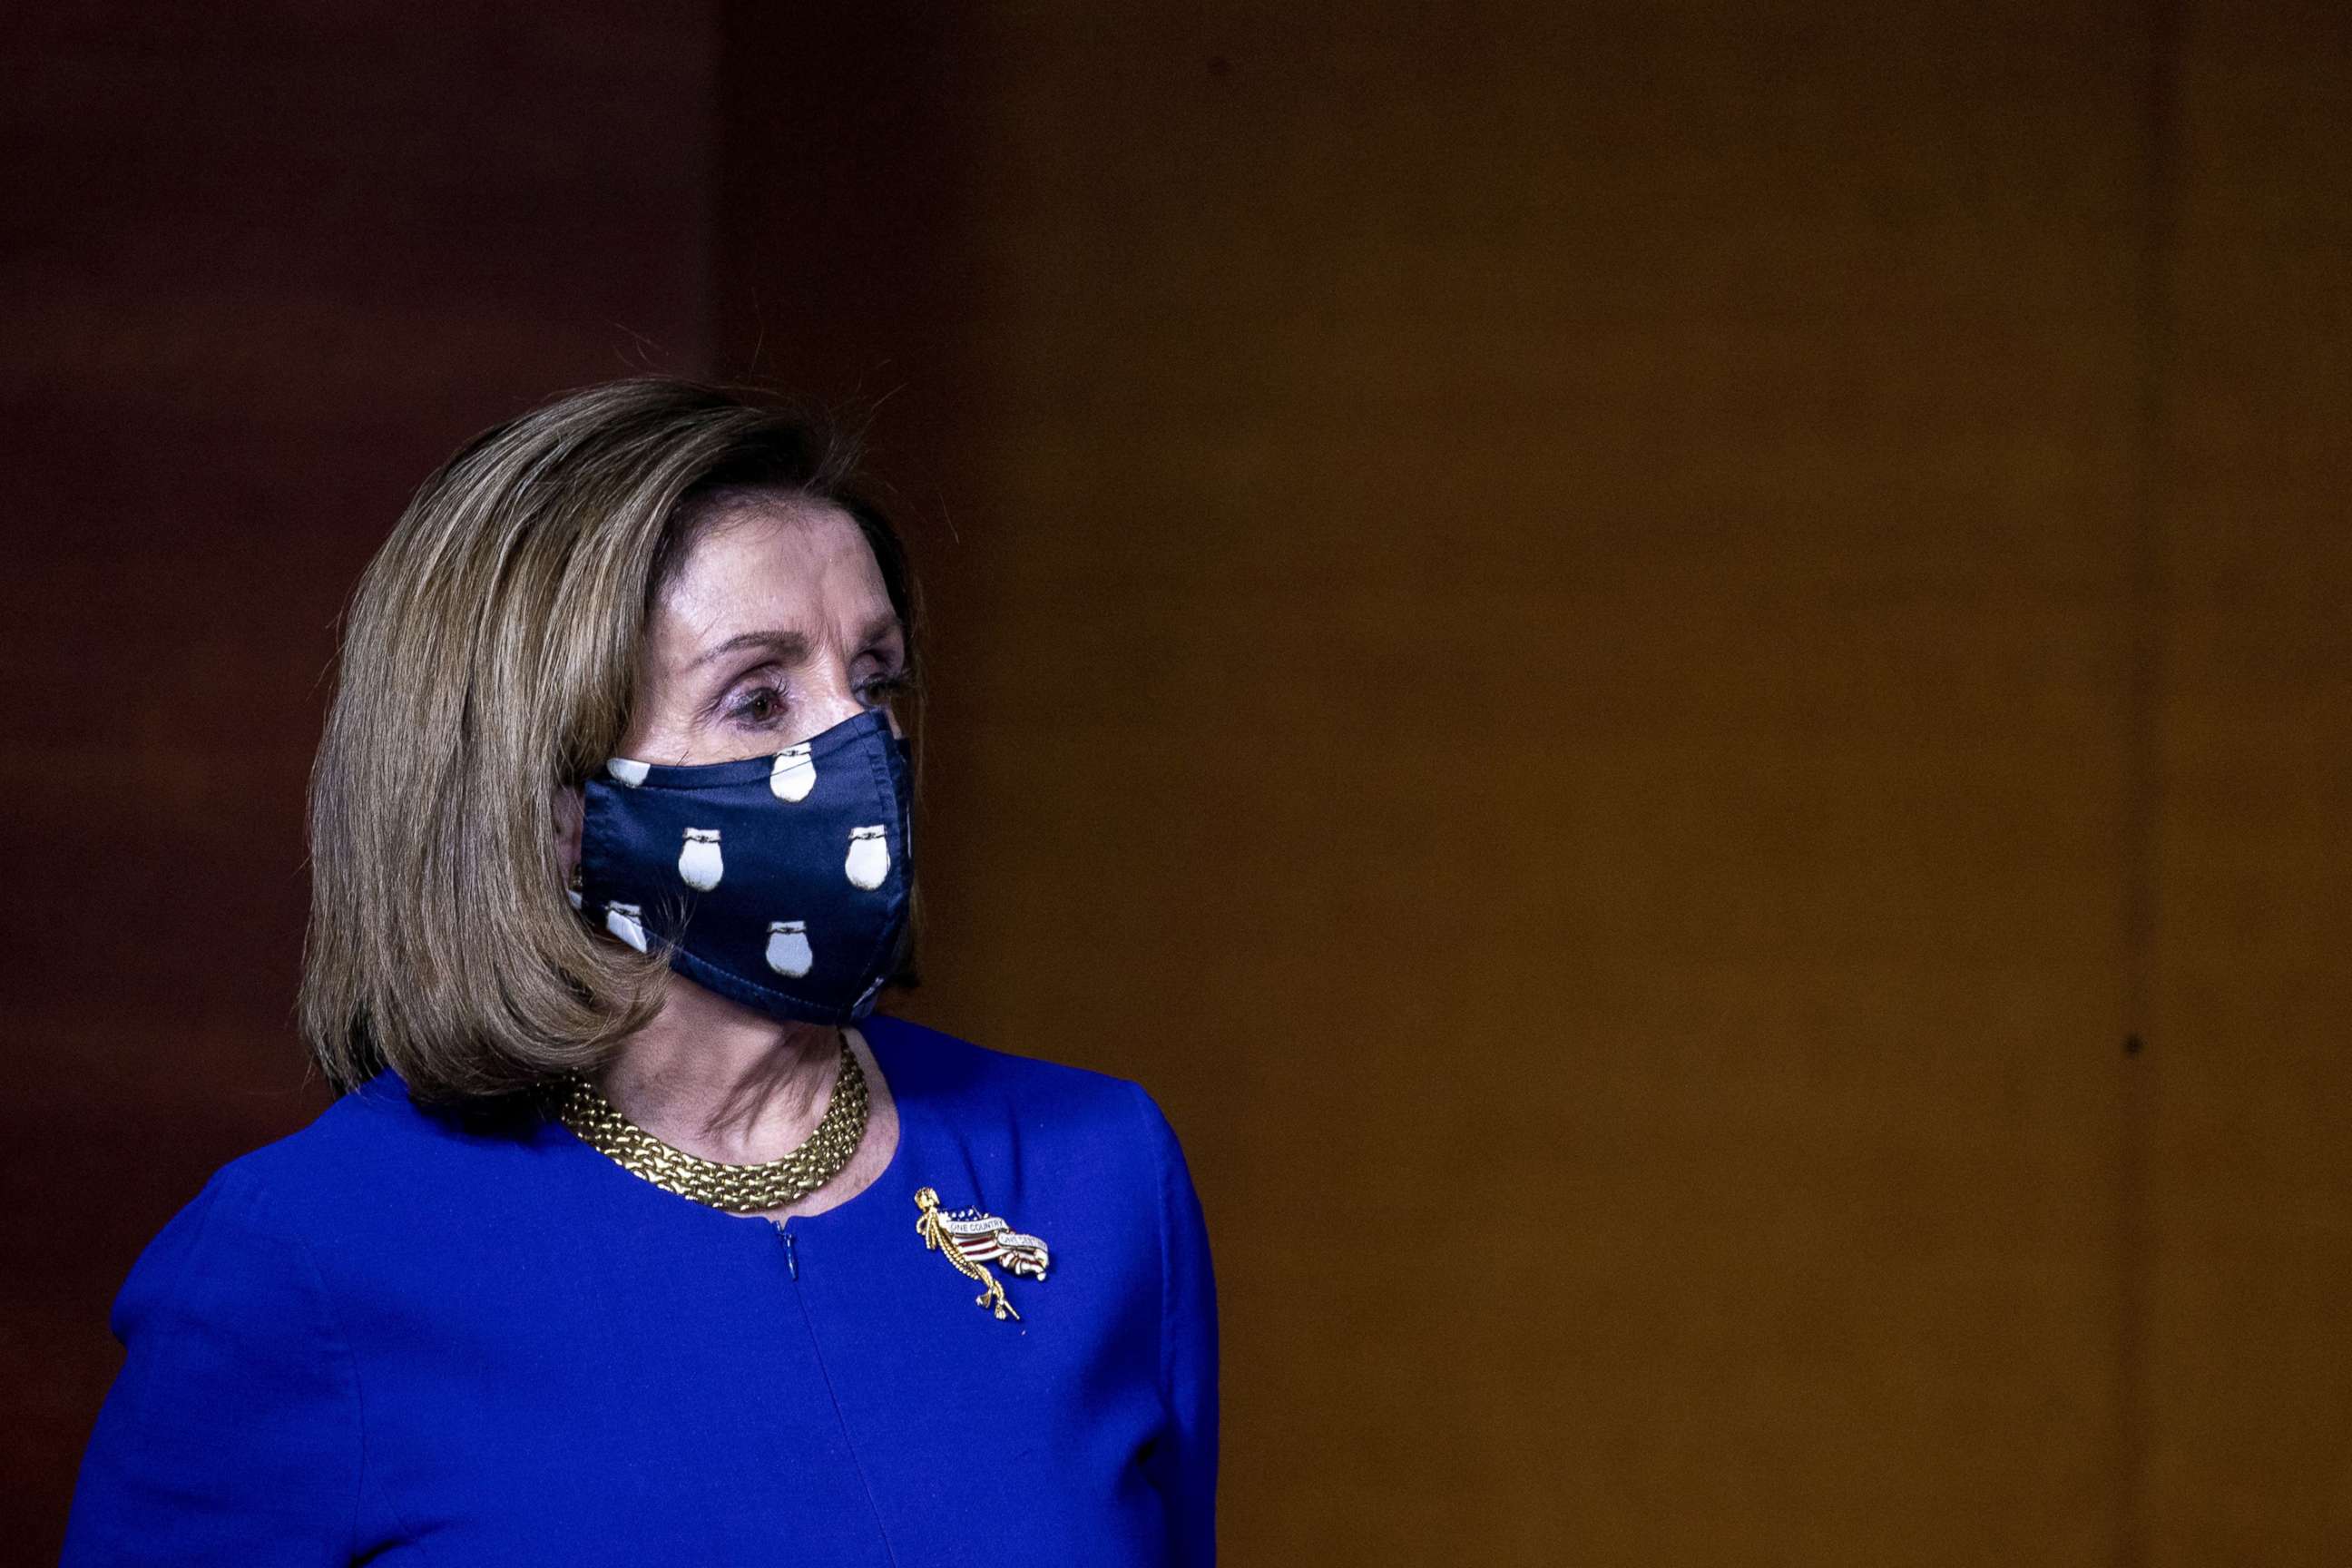 PHOTO: Speaker of the House Nancy Pelosi gives a press conference at the U.S. Capitol in Washington, D.C., April 15 2021.